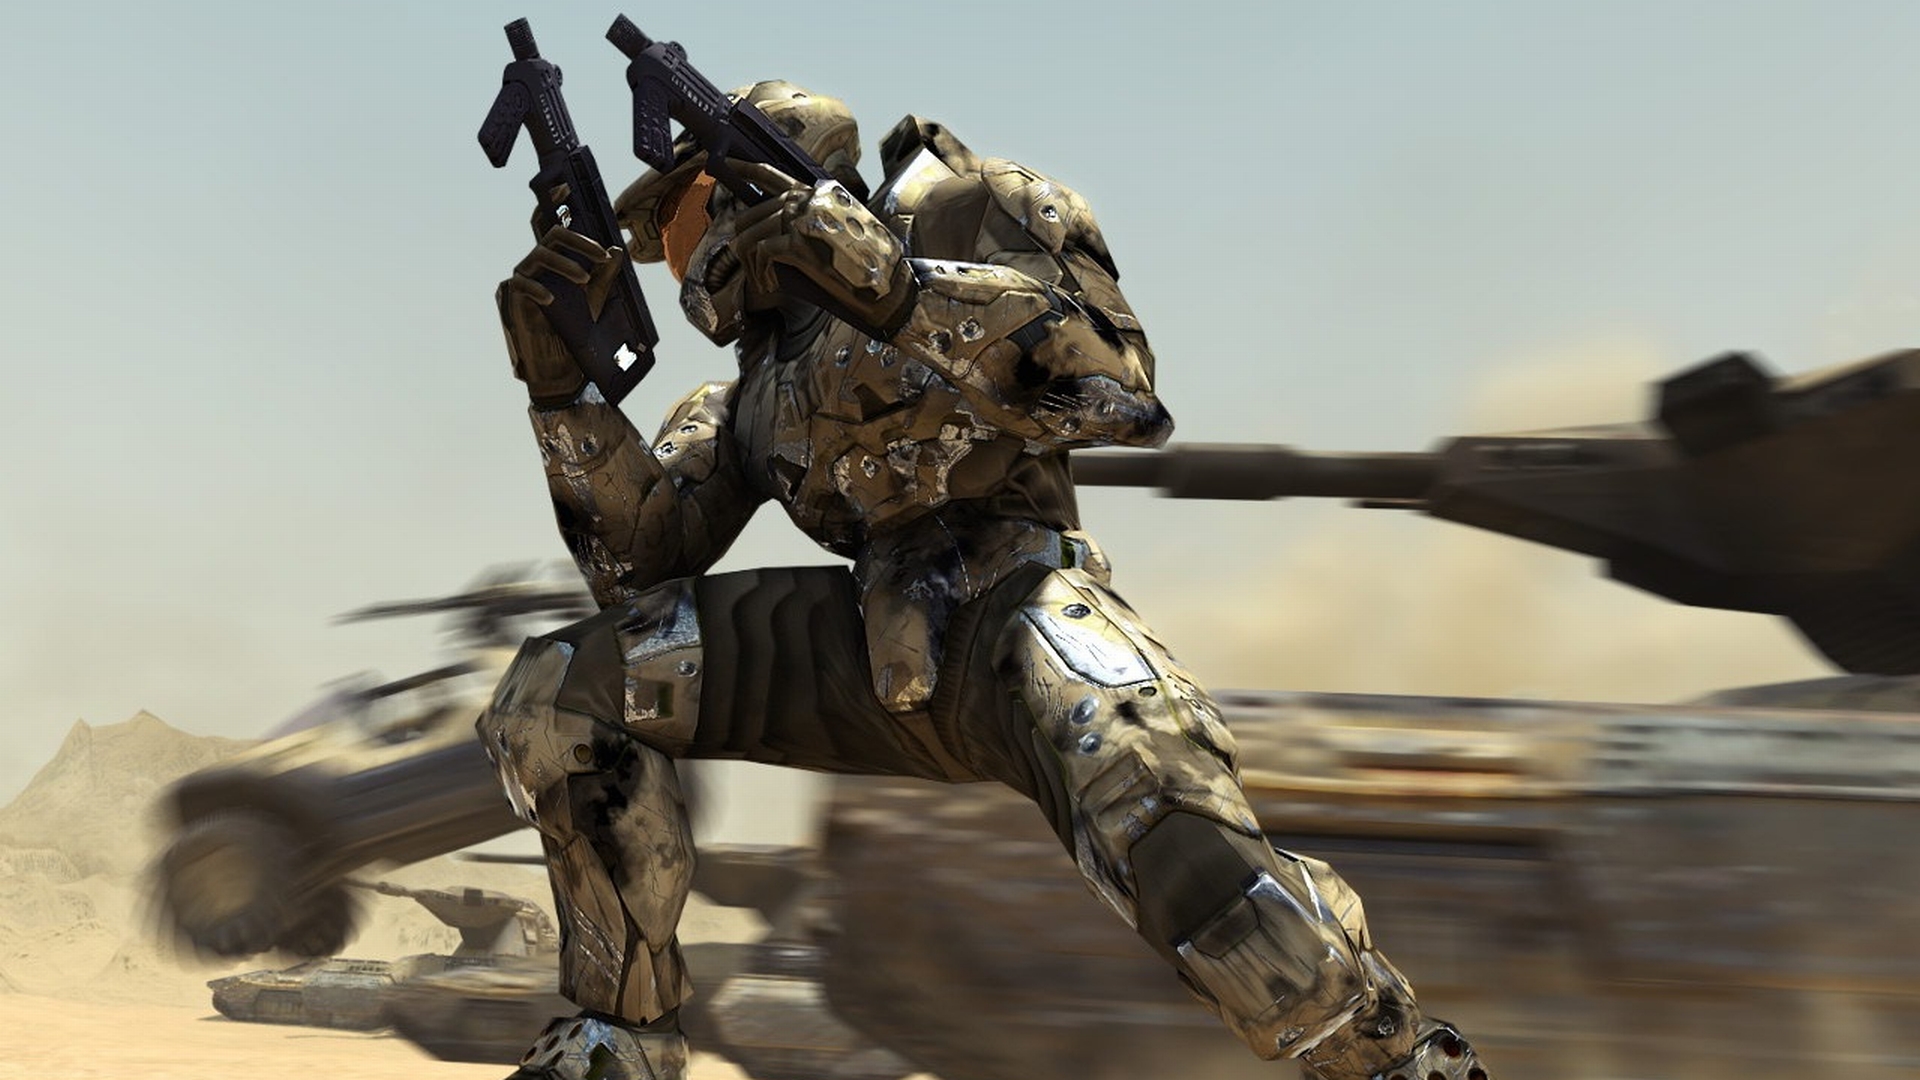 Halo's iconic Master Chief in action as a video game character.